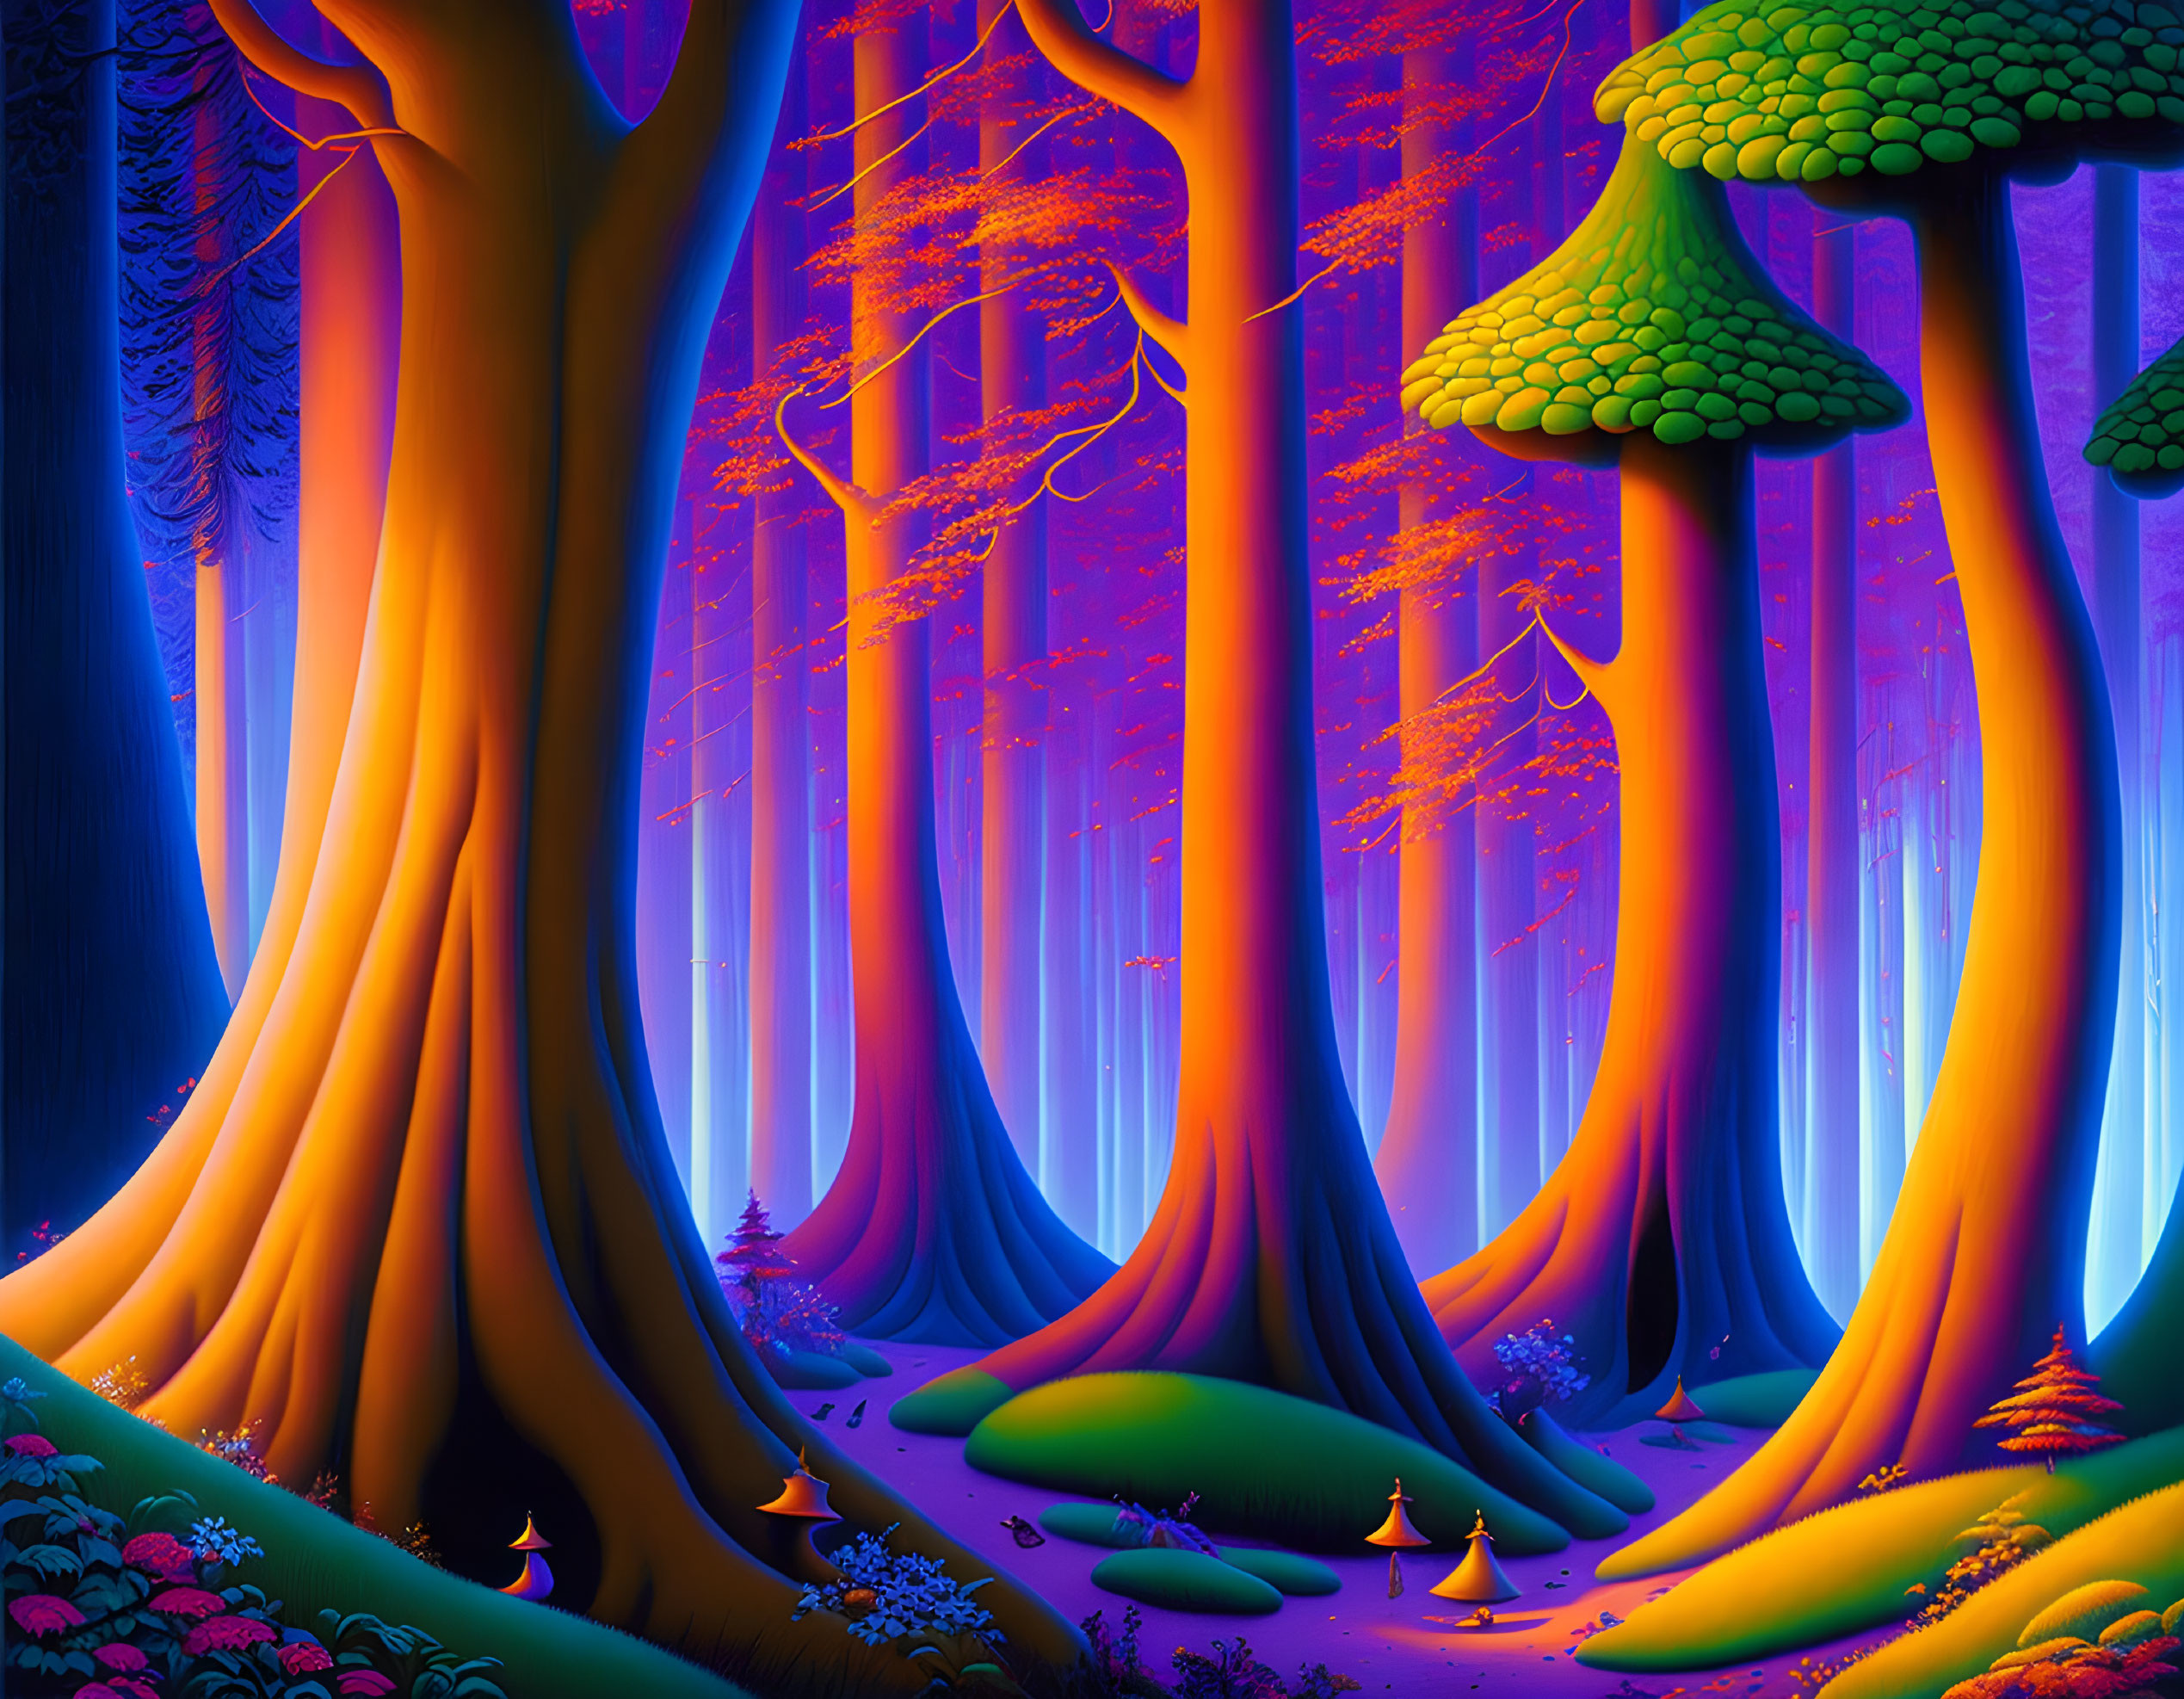 Fairytale forest